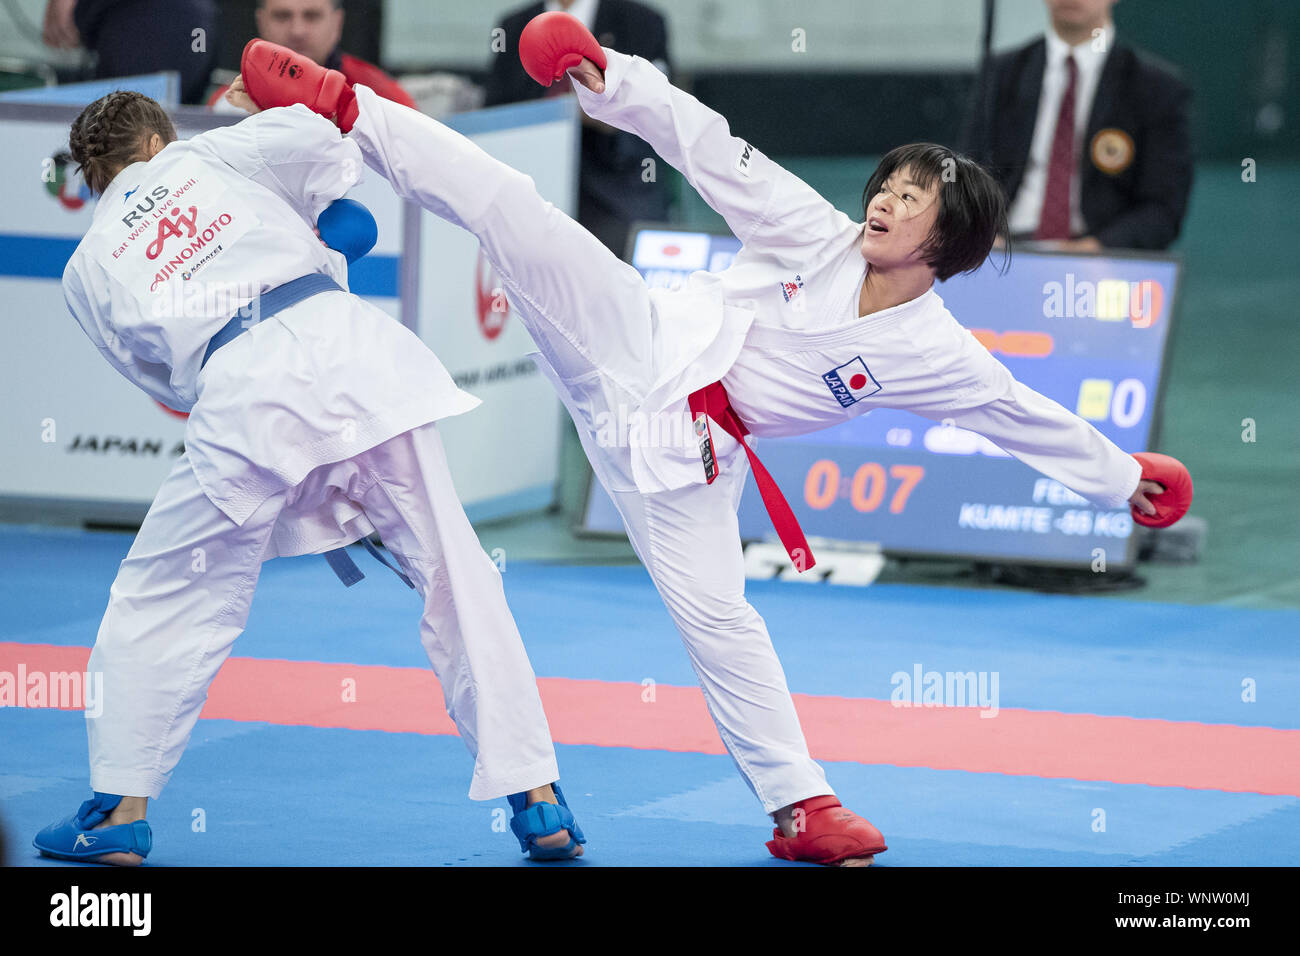 Tokyo, Japan. 6th Sep, 2019. Valeria Alekhina of Russia (blue) fights  against Ruri Fujita of Japan (red) during the elimination round of Female  Kumite's -55kg category at Karate1 Premier League Tokyo 2019.